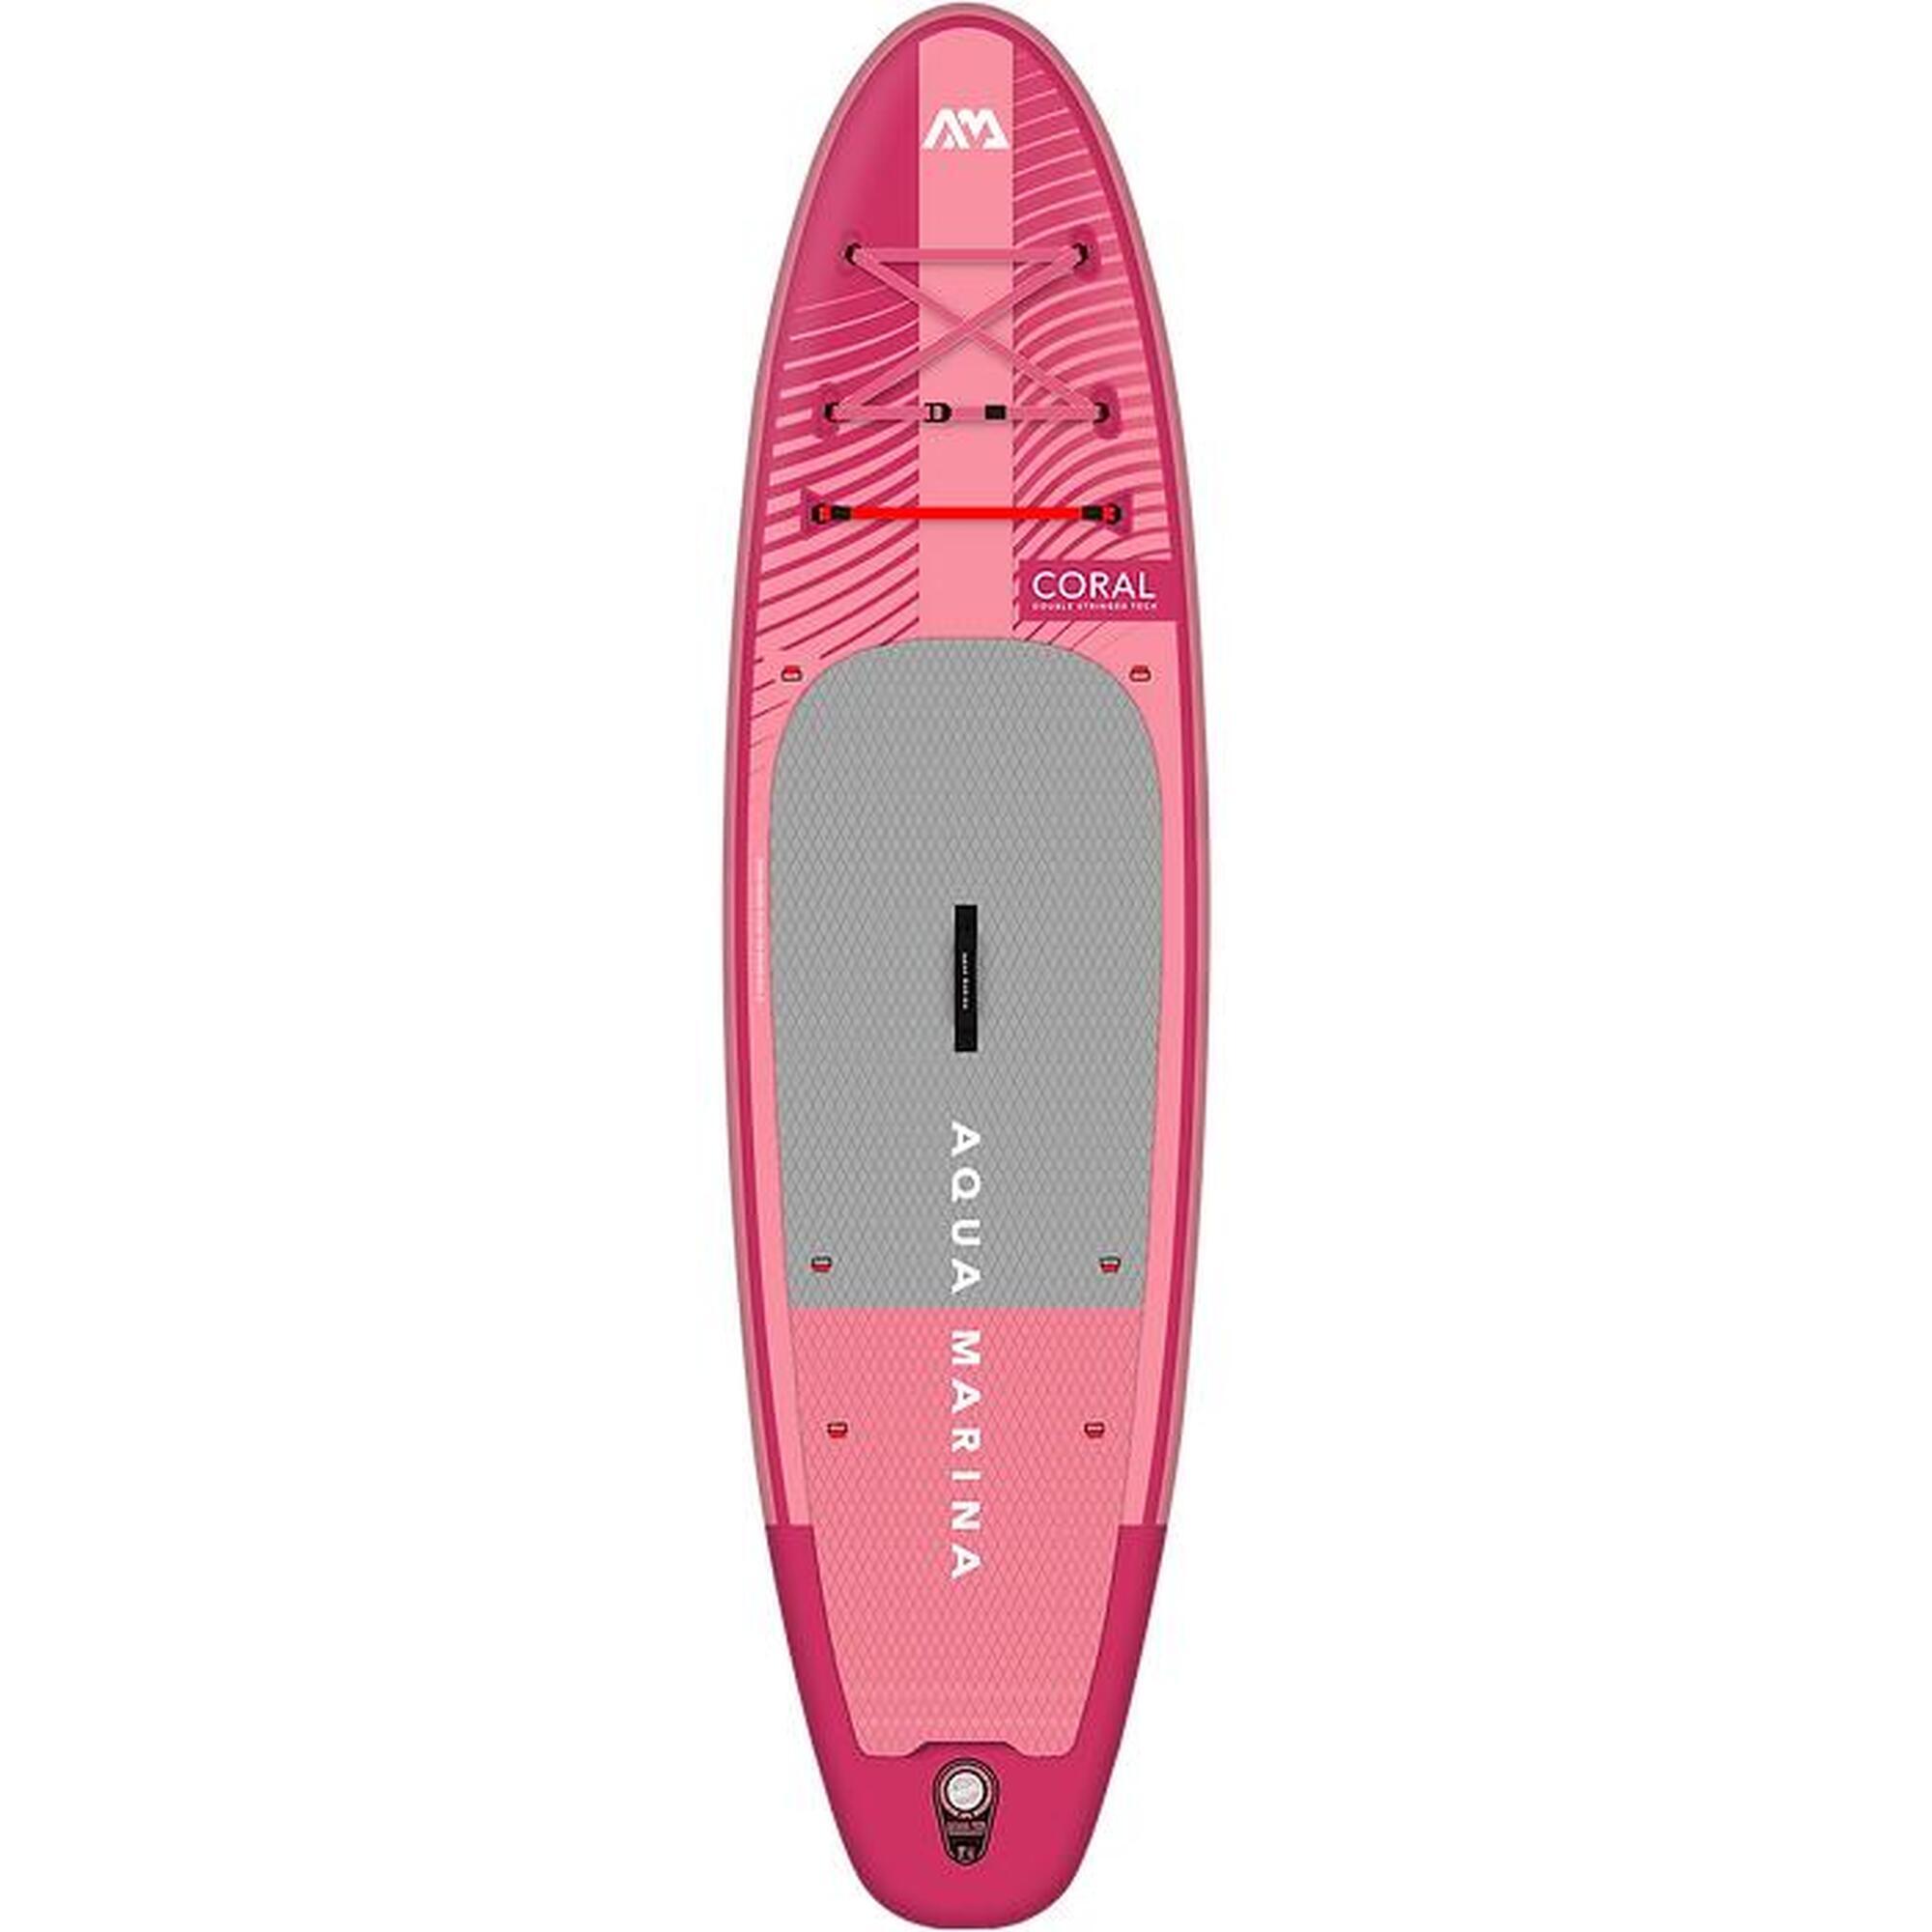 CORAL Inflatable Stand Up Paddle Board Set - Pink